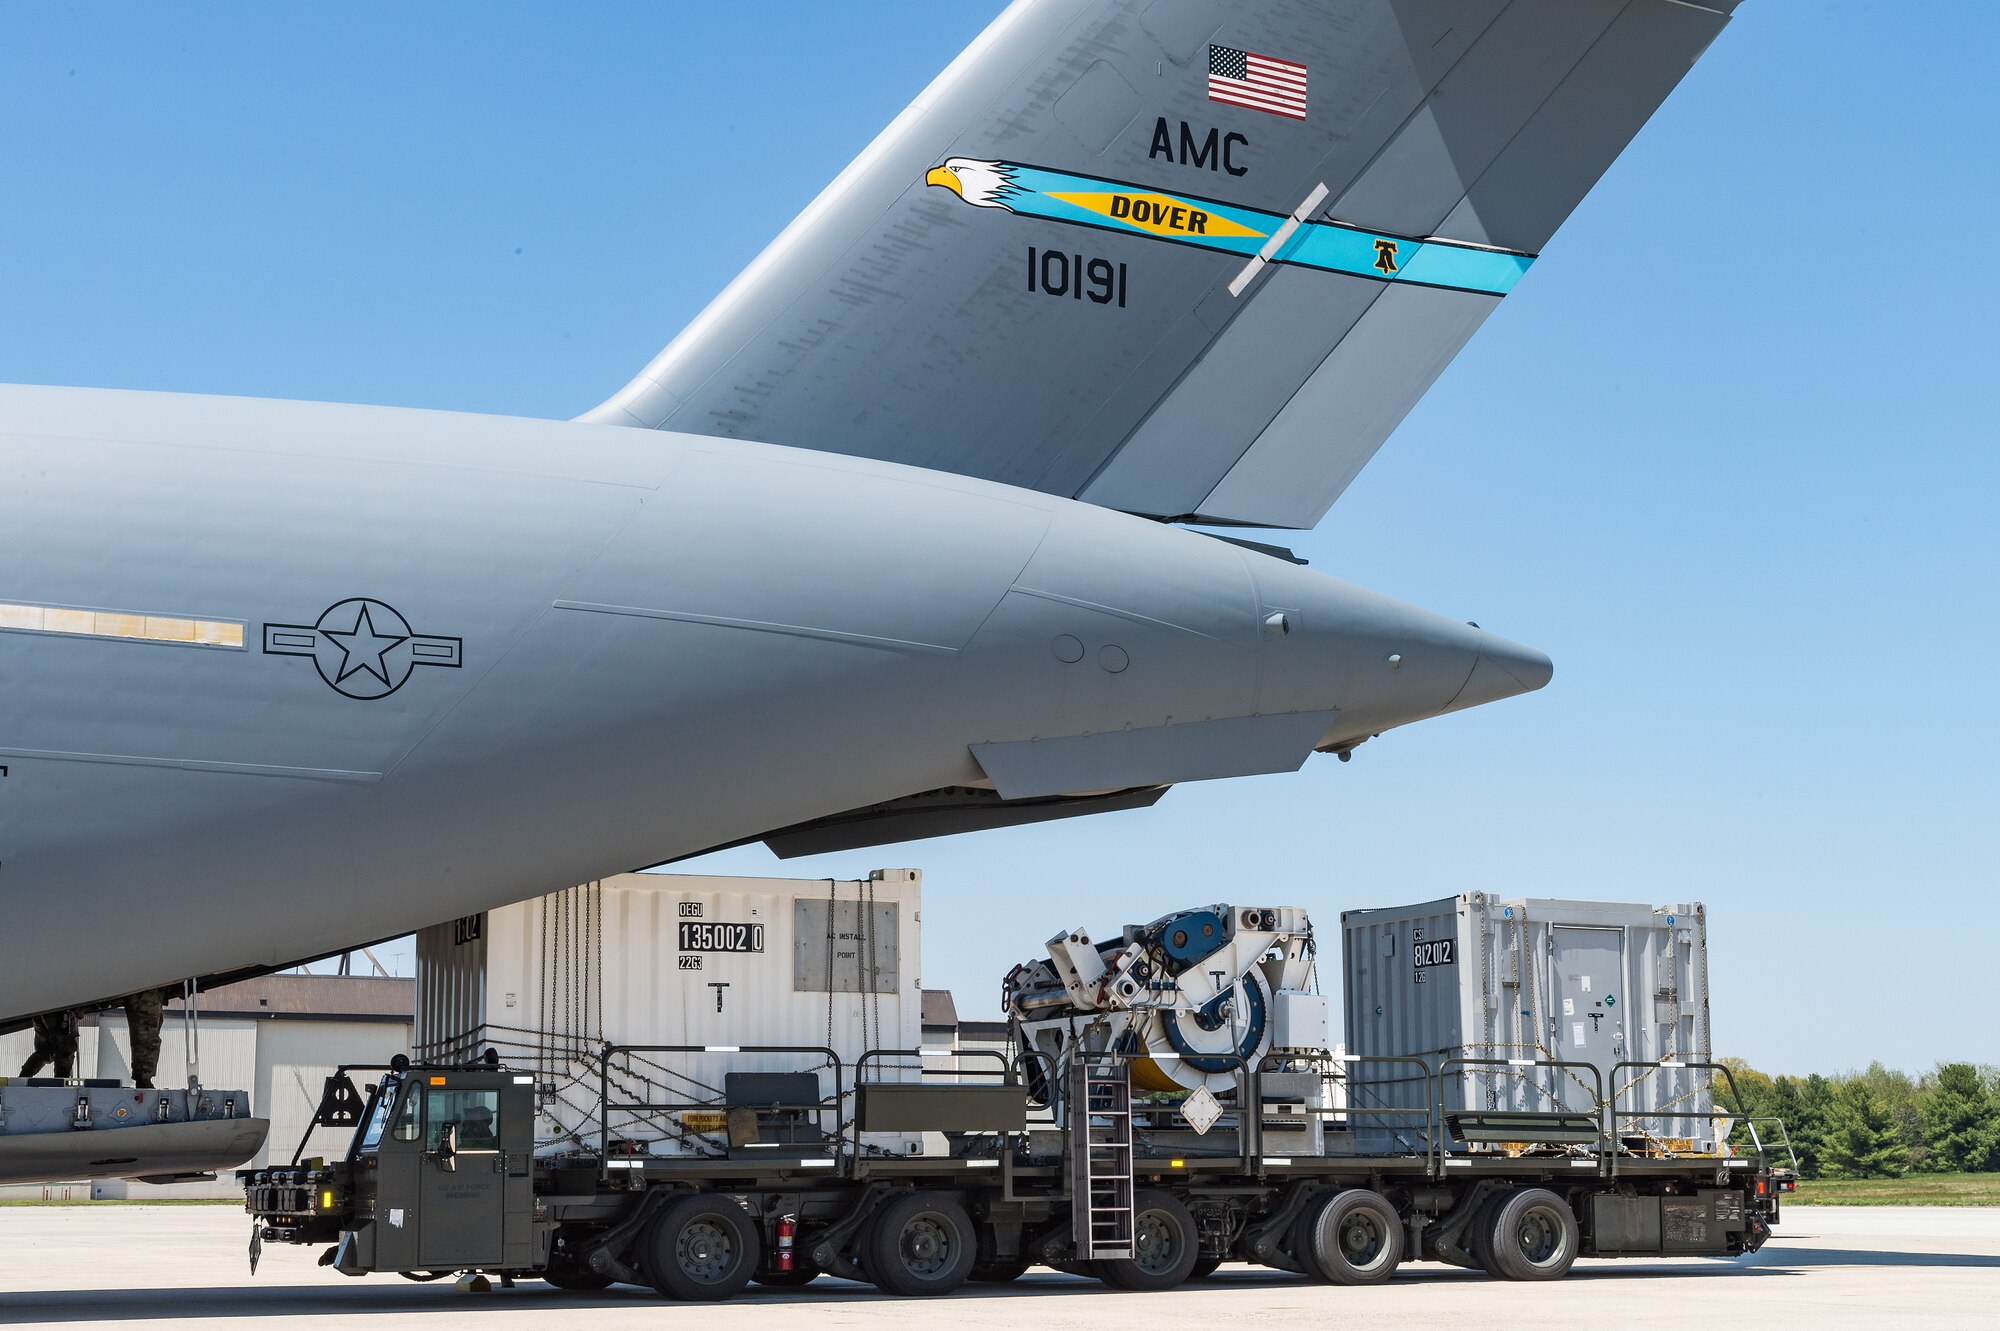 Airmen from the 436th Aerial Port Squadron load cargo onto a C-17 Globemaster III at Dover Air Force Base, Delaware, April 23, 2021. The 436th APS is the largest aerial port in the Department of Defense. (U.S. Air Force photo by Roland Balik)